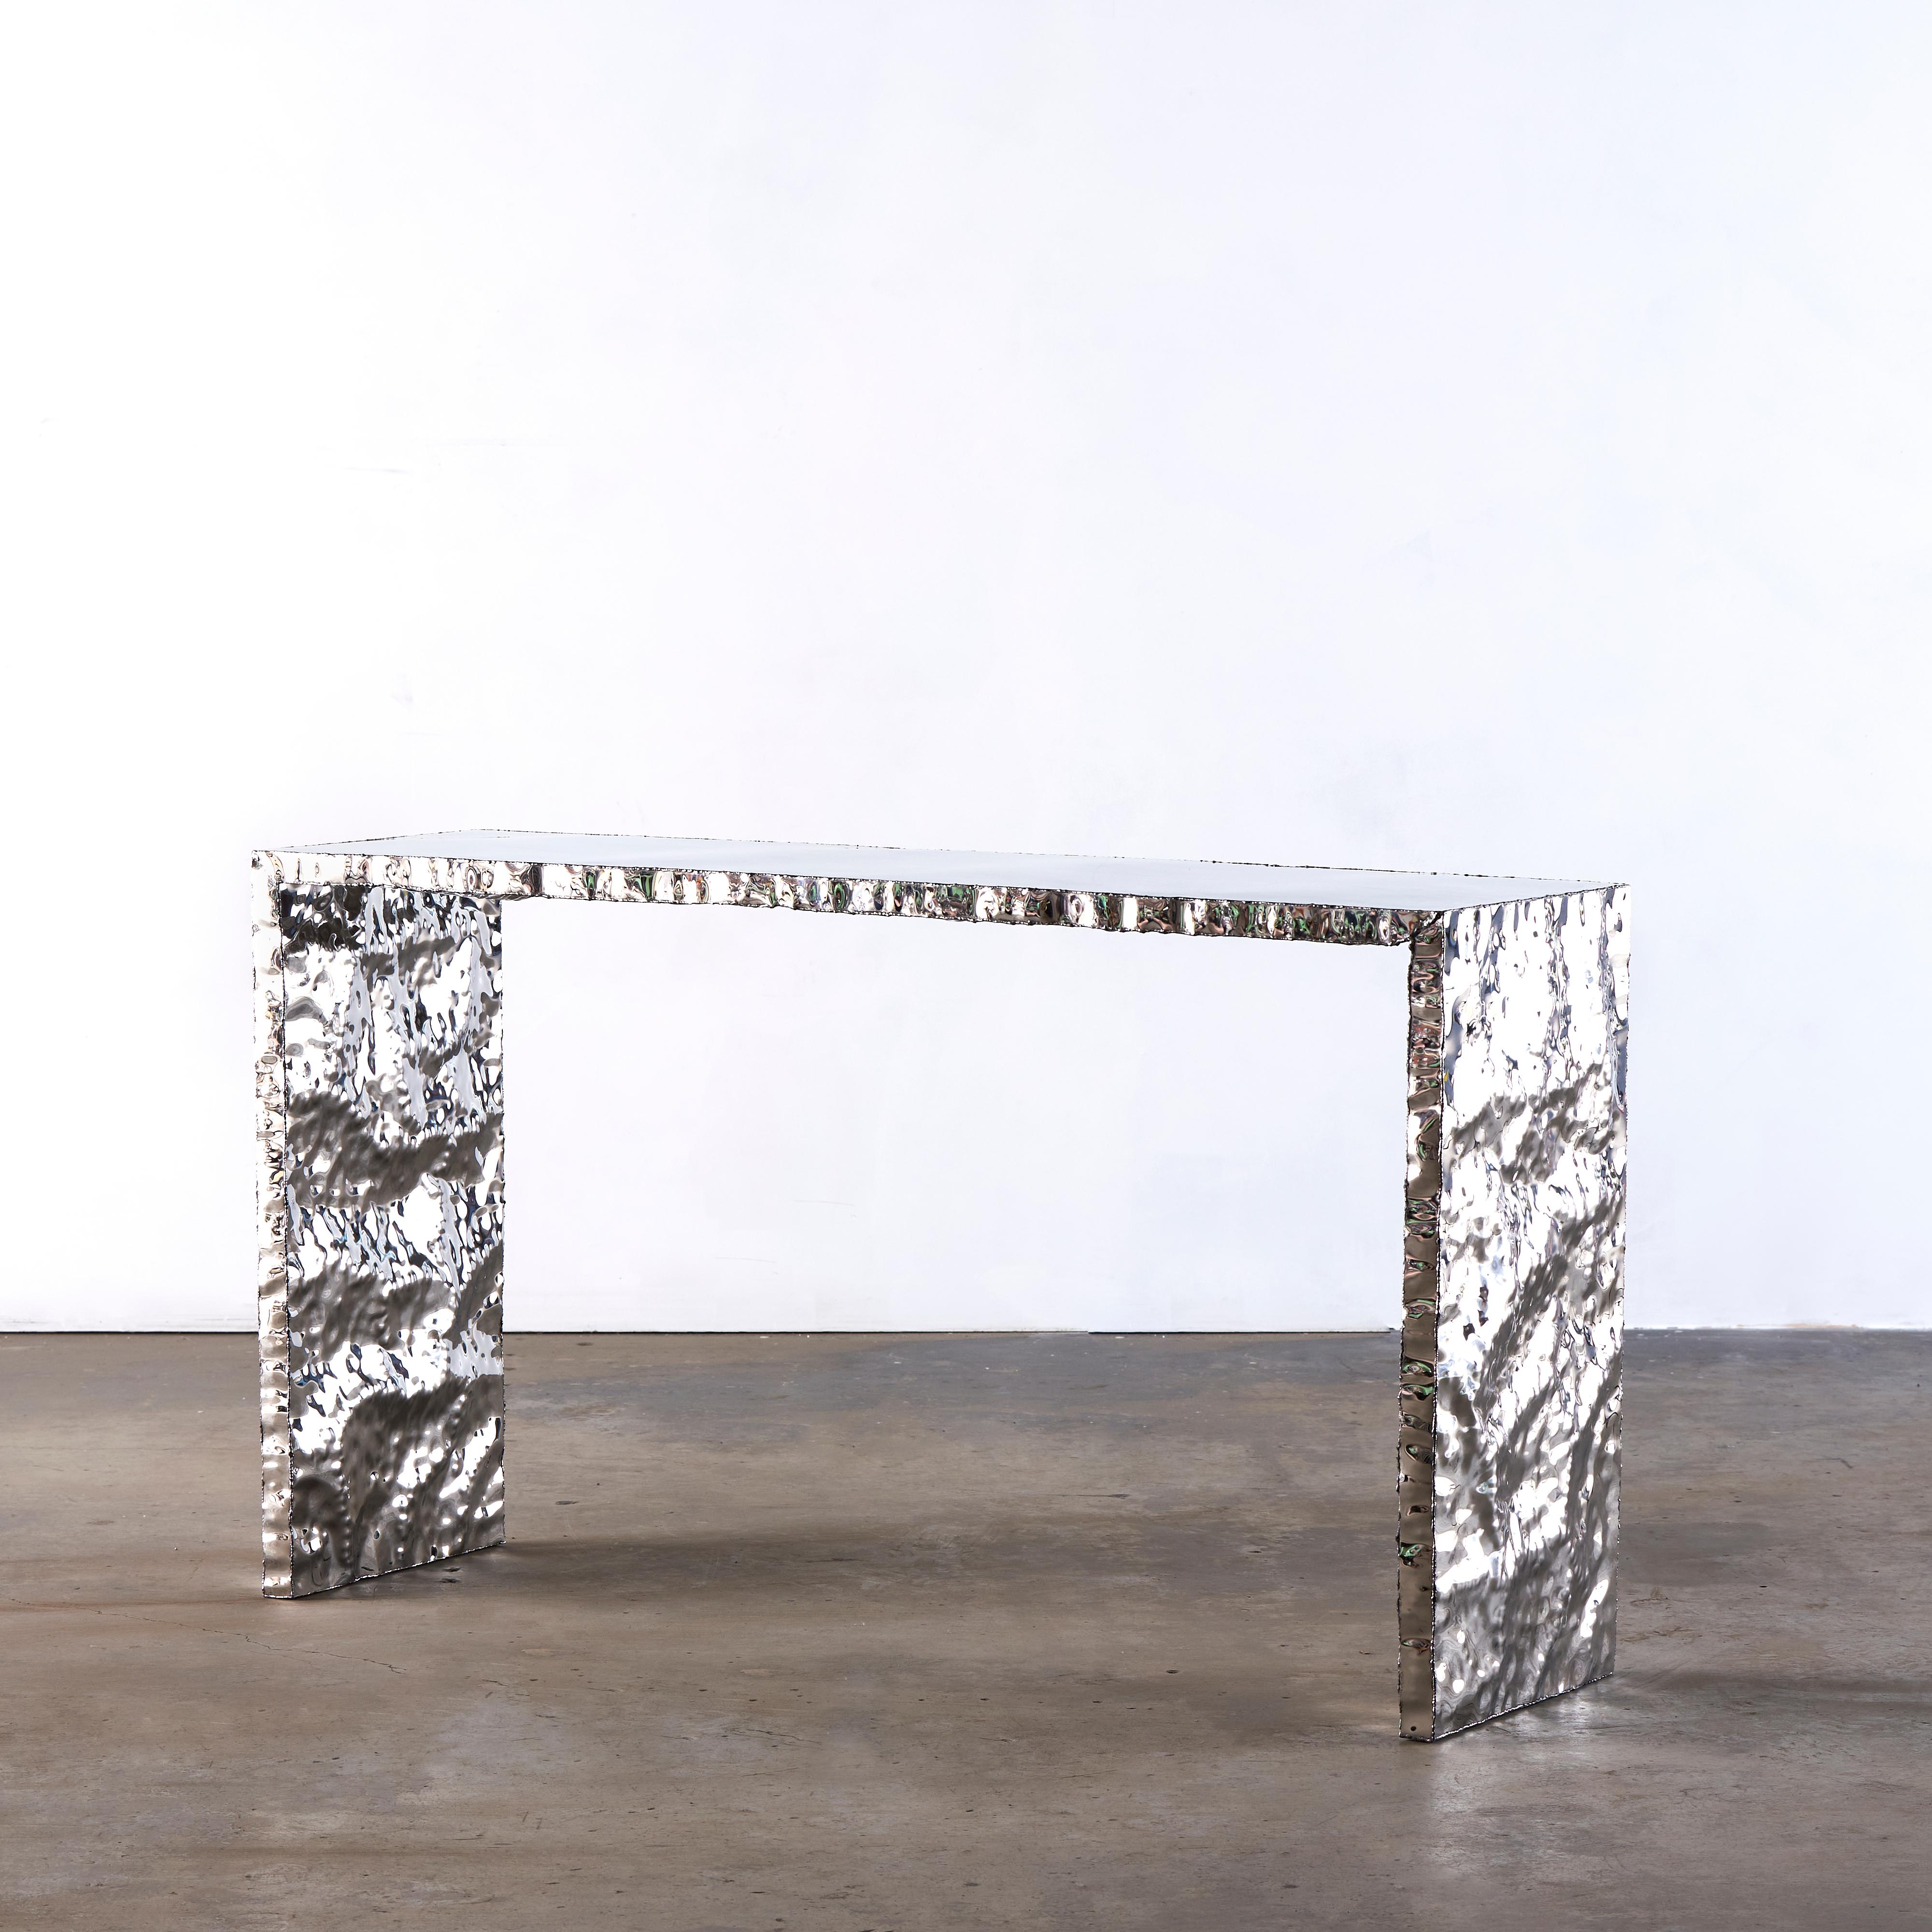 Crinkle console by Michael Gittings Studio
One of a Kind
Dimensions: D 150 x W 40 x H 81 cm
Materials: Mirror polished stainless steel

Michael Gittings
Melbourne based designer Michael Gittings aims to
Challenge pre-conceptions around